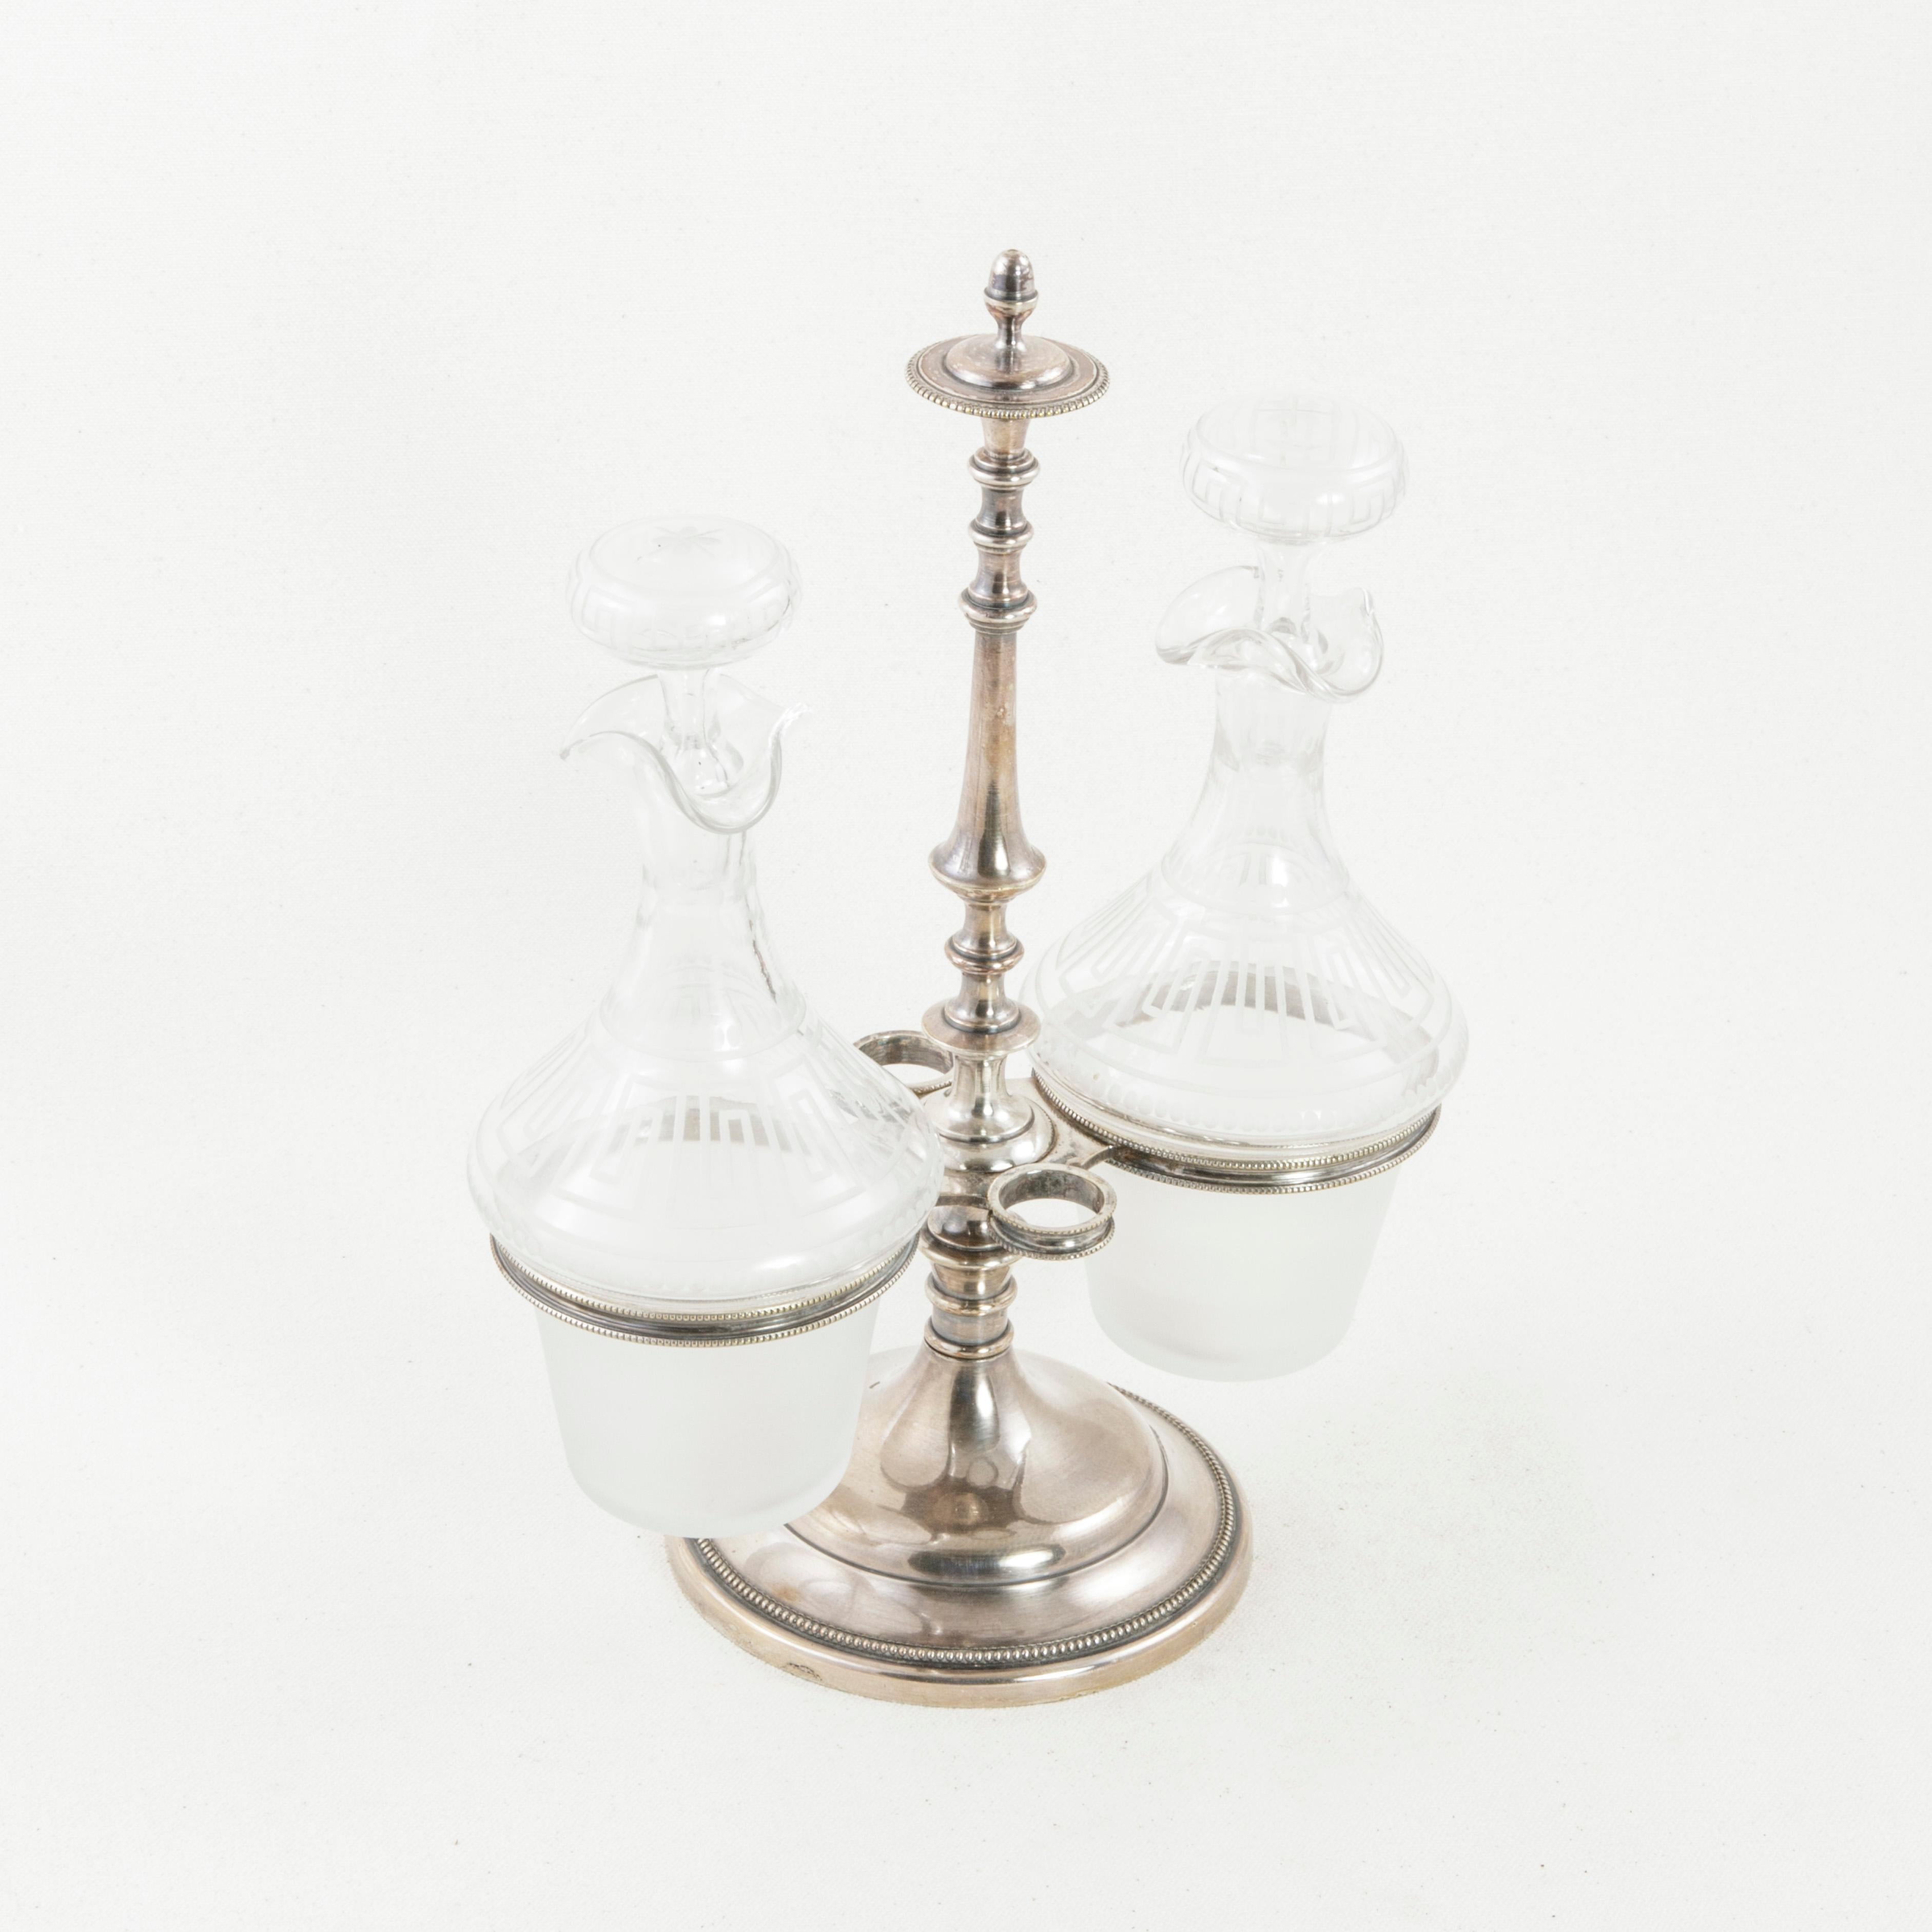 This early 20th century French oil and vinegar cruet set features a footed silver plate support topped with a finial and detailed with beading. Two rings support the crystal carafes containing the oil and vinegar for serving at the table. Additional